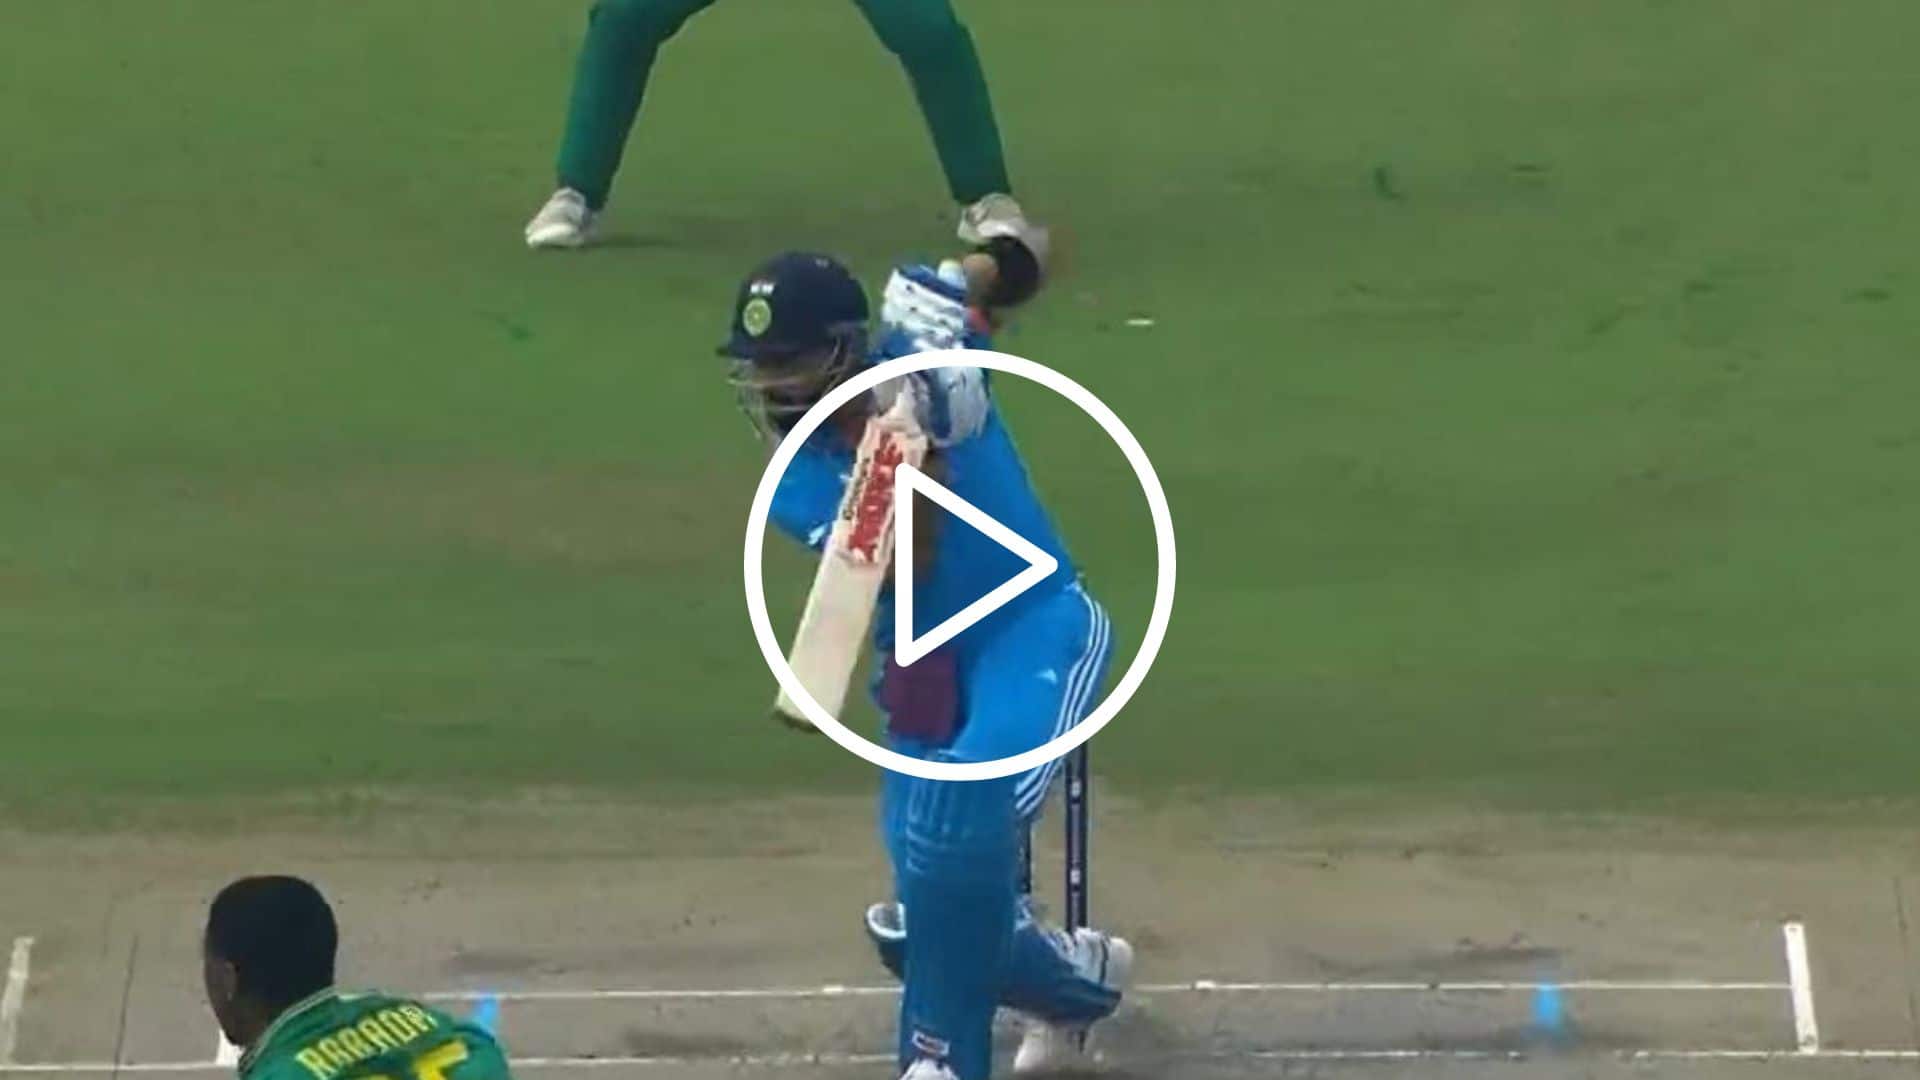 [Watch] Virat Kohli Gets Off The Mark With Trademark Cover Drive On His Birthday 